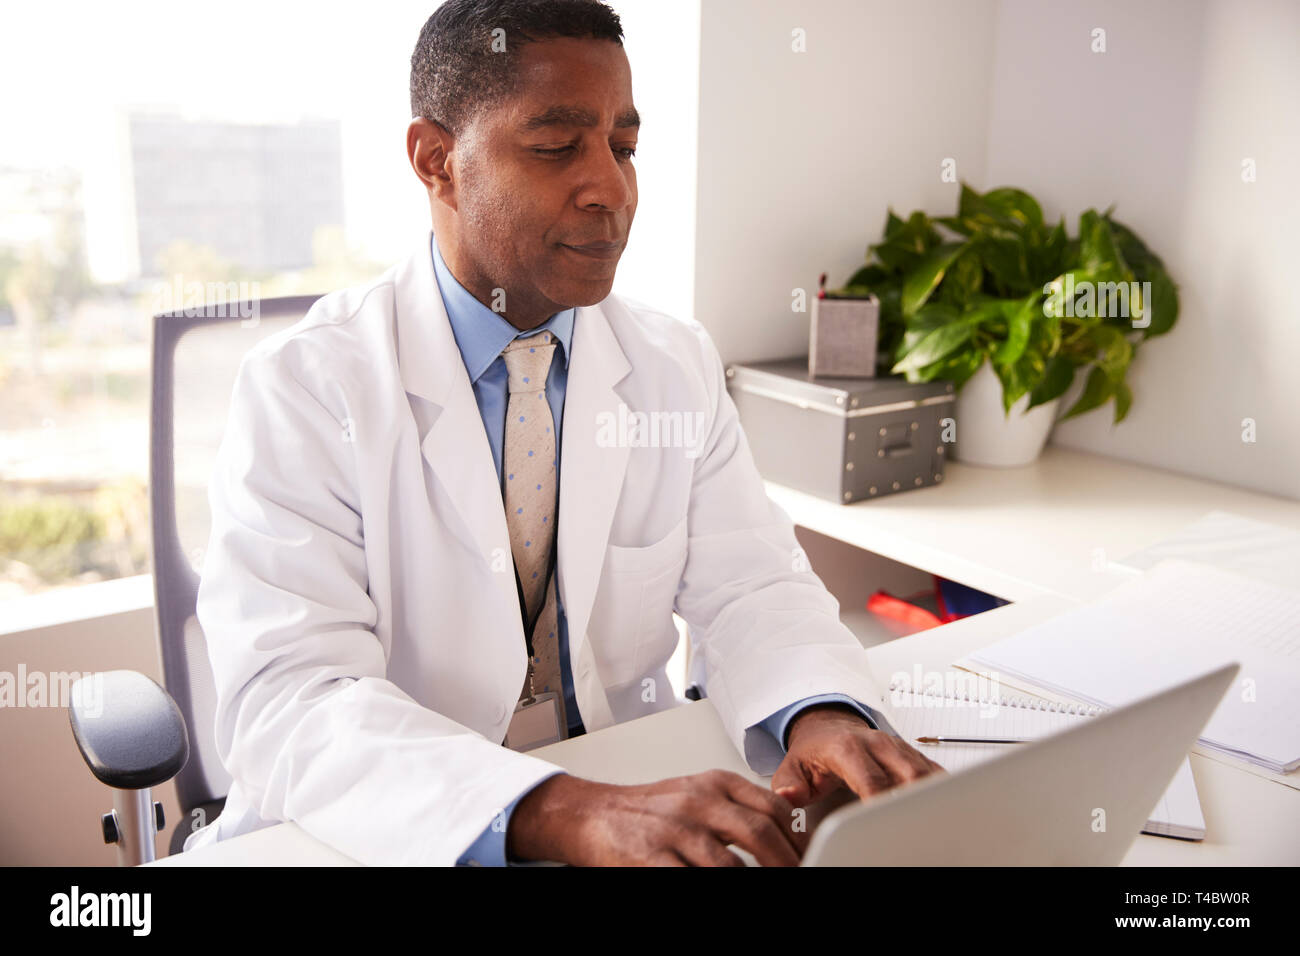 Male Doctor Wearing White Coat In Office Sitting At Desk Working On Laptop Stock Photo